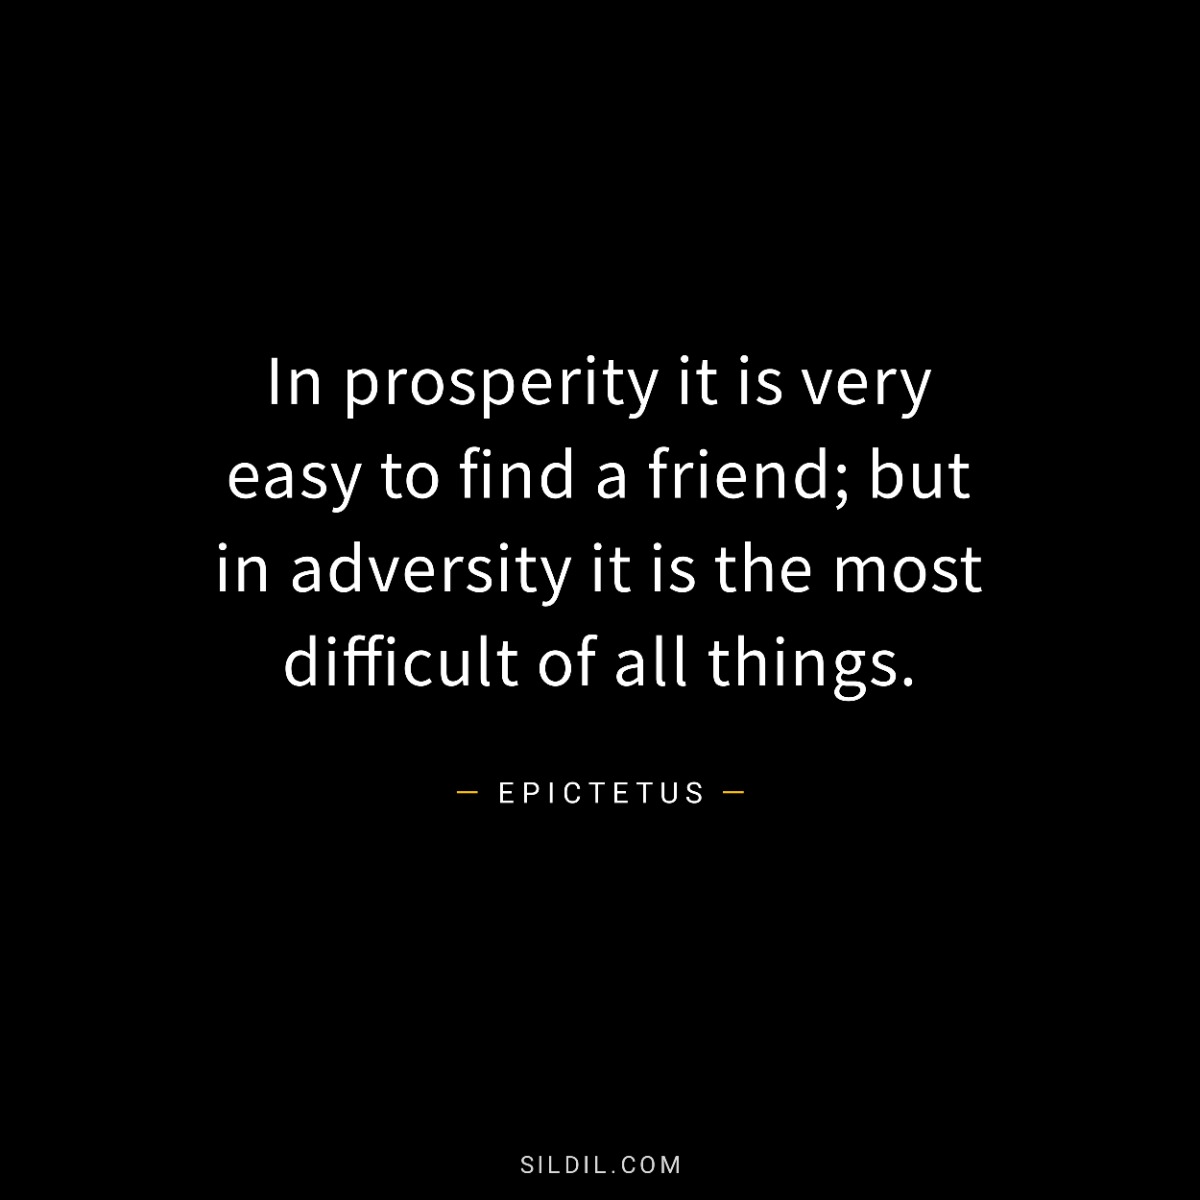 In prosperity it is very easy to find a friend; but in adversity it is the most difficult of all things.